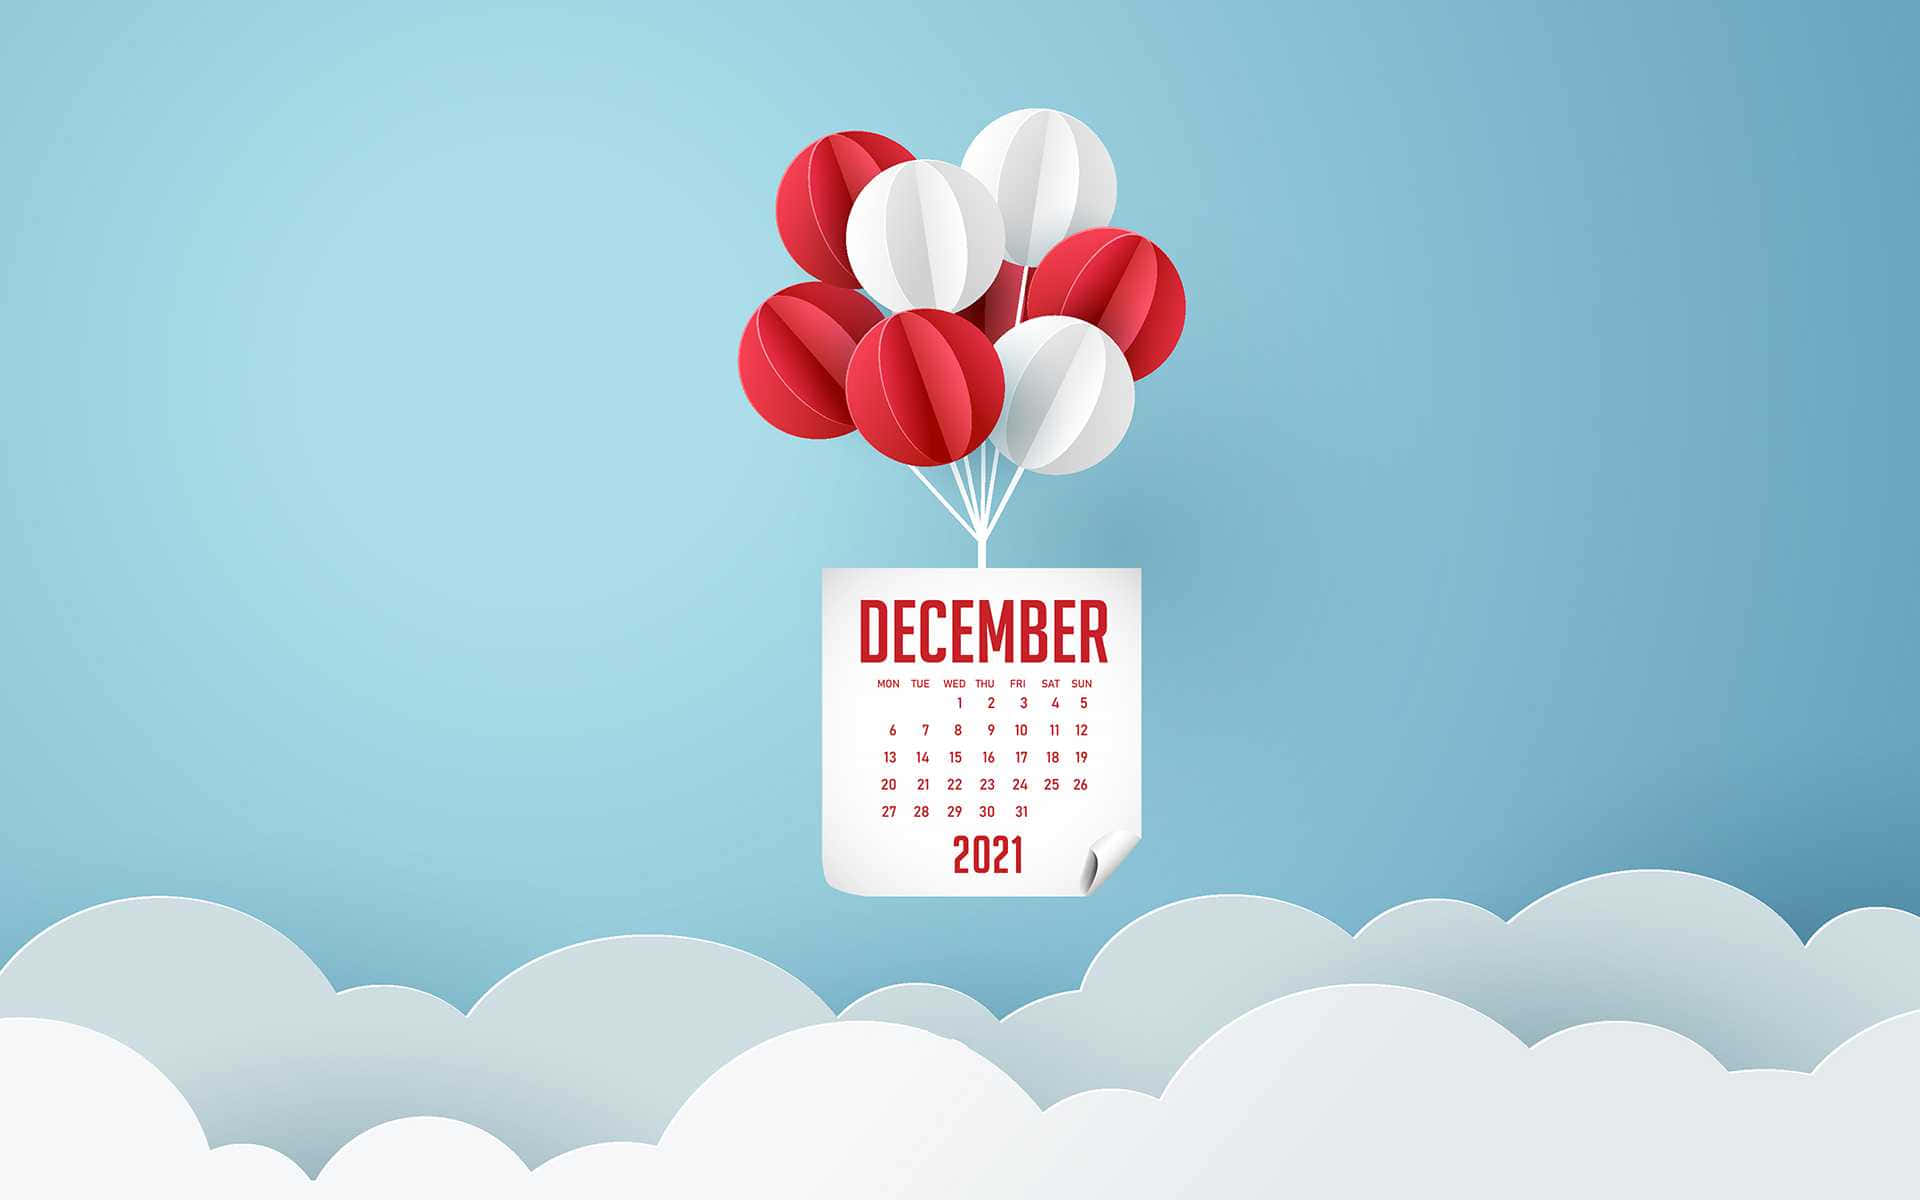 Bring in the winter cheer with this beautiful December wallpaper